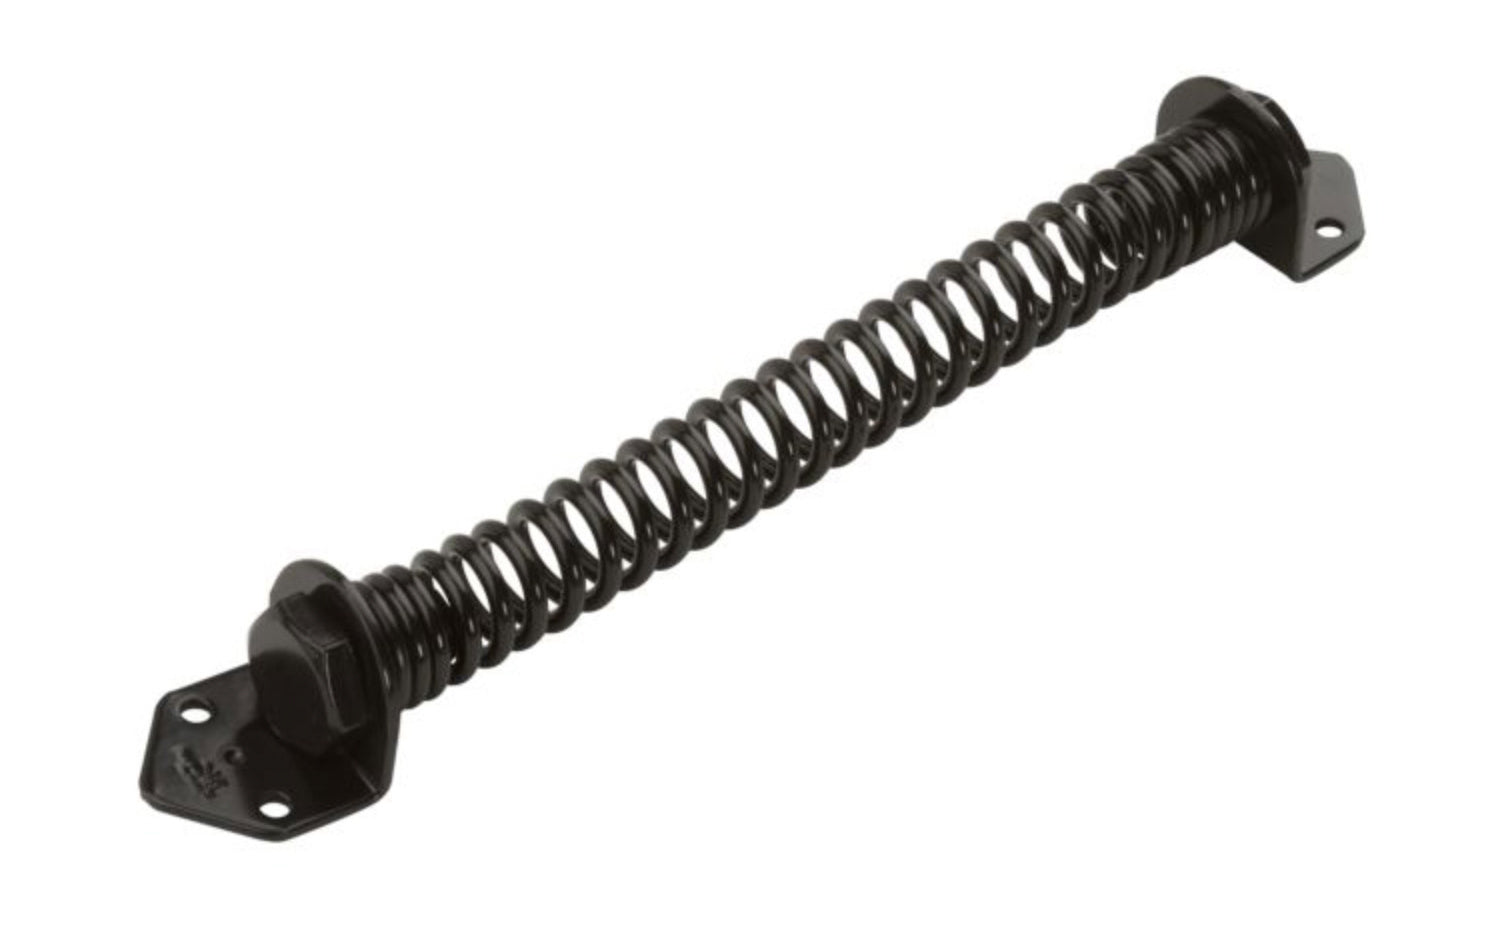 This door & gate spring is a self-closing spring designed to close doors & gates automatically. Closing tension is adjustable. Manufactured from hot rolled steel with triple protected finish for extra corrosion protection. Black powder coated finish. Available in 11